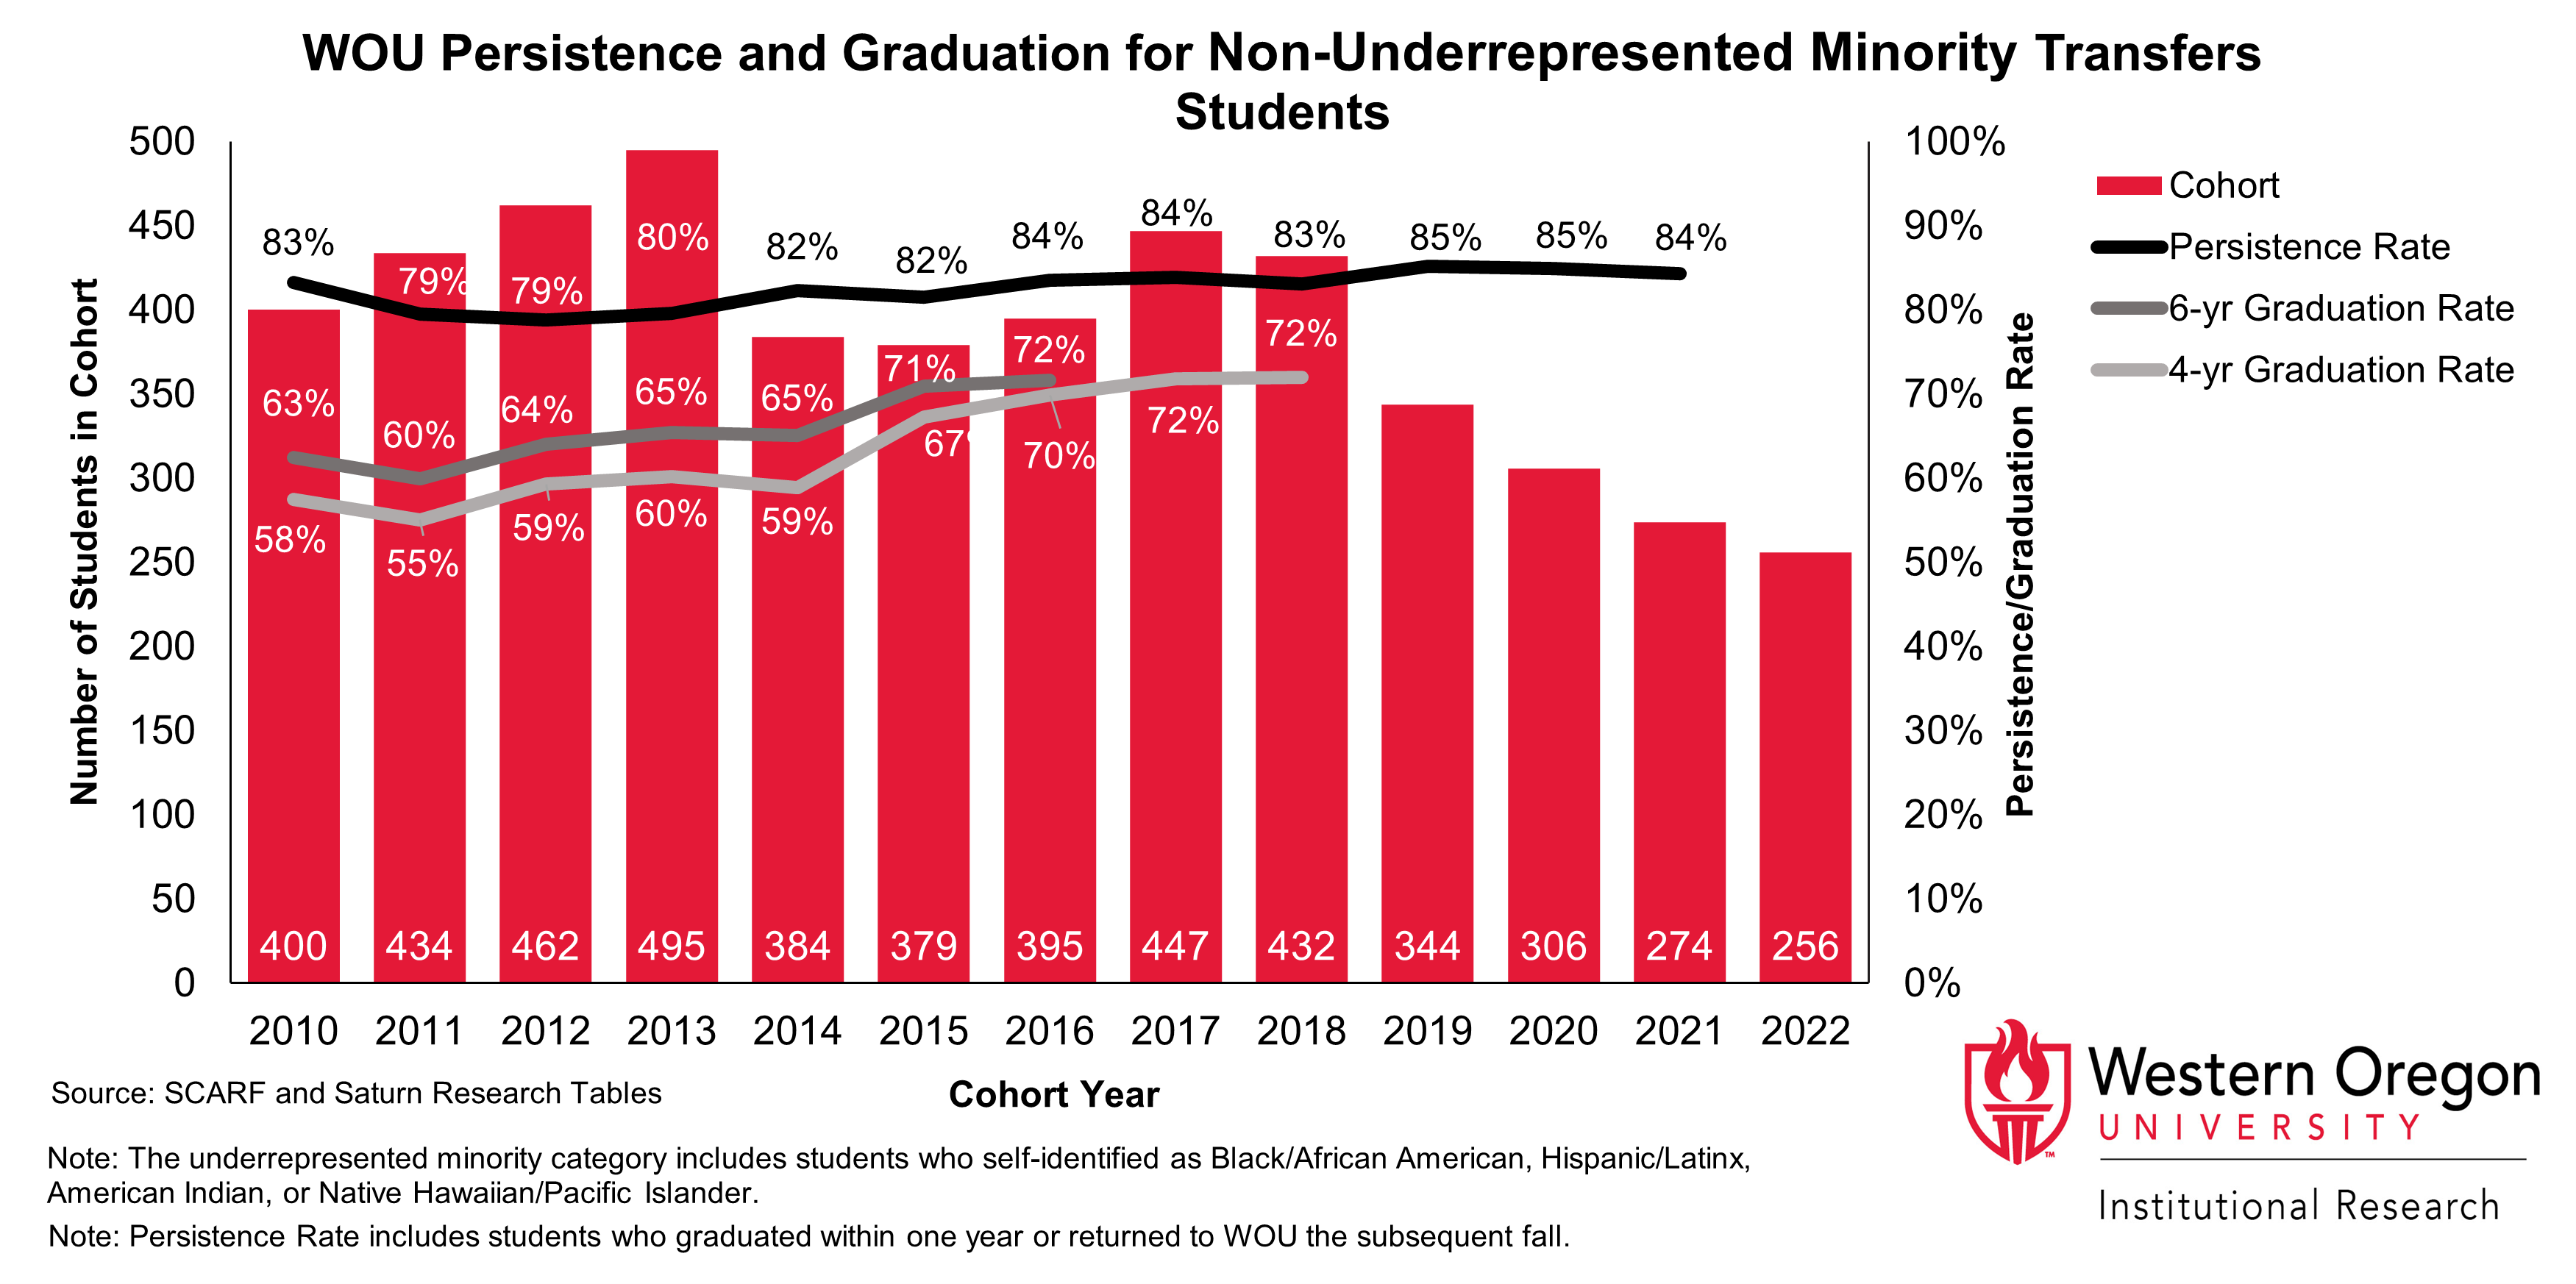 Bar and line graph of retention and 4- and 6-year graduation rates since 2010 for WOU transfer students that are not categorized as belonging to an underrepresented racial or ethnic minority group, showing that graduation rates have been steadily increasing while persistance rates have remained largely stable